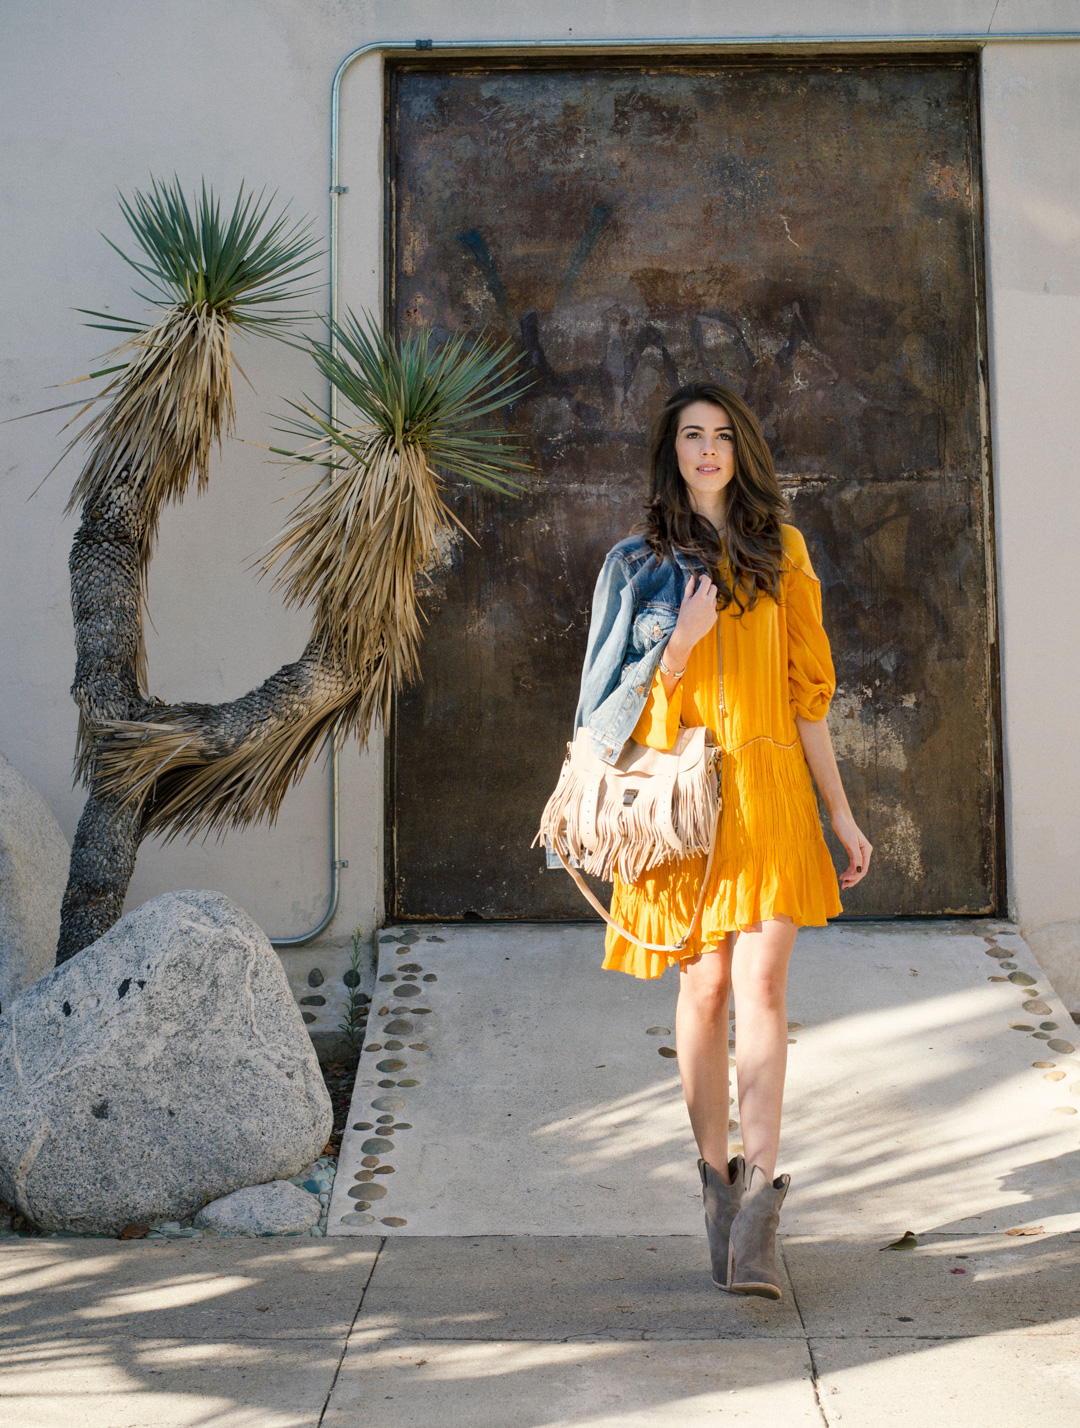 Jackie Roque styling a Zara yellow dress, Proenza Schouler Bag, and Joie boots